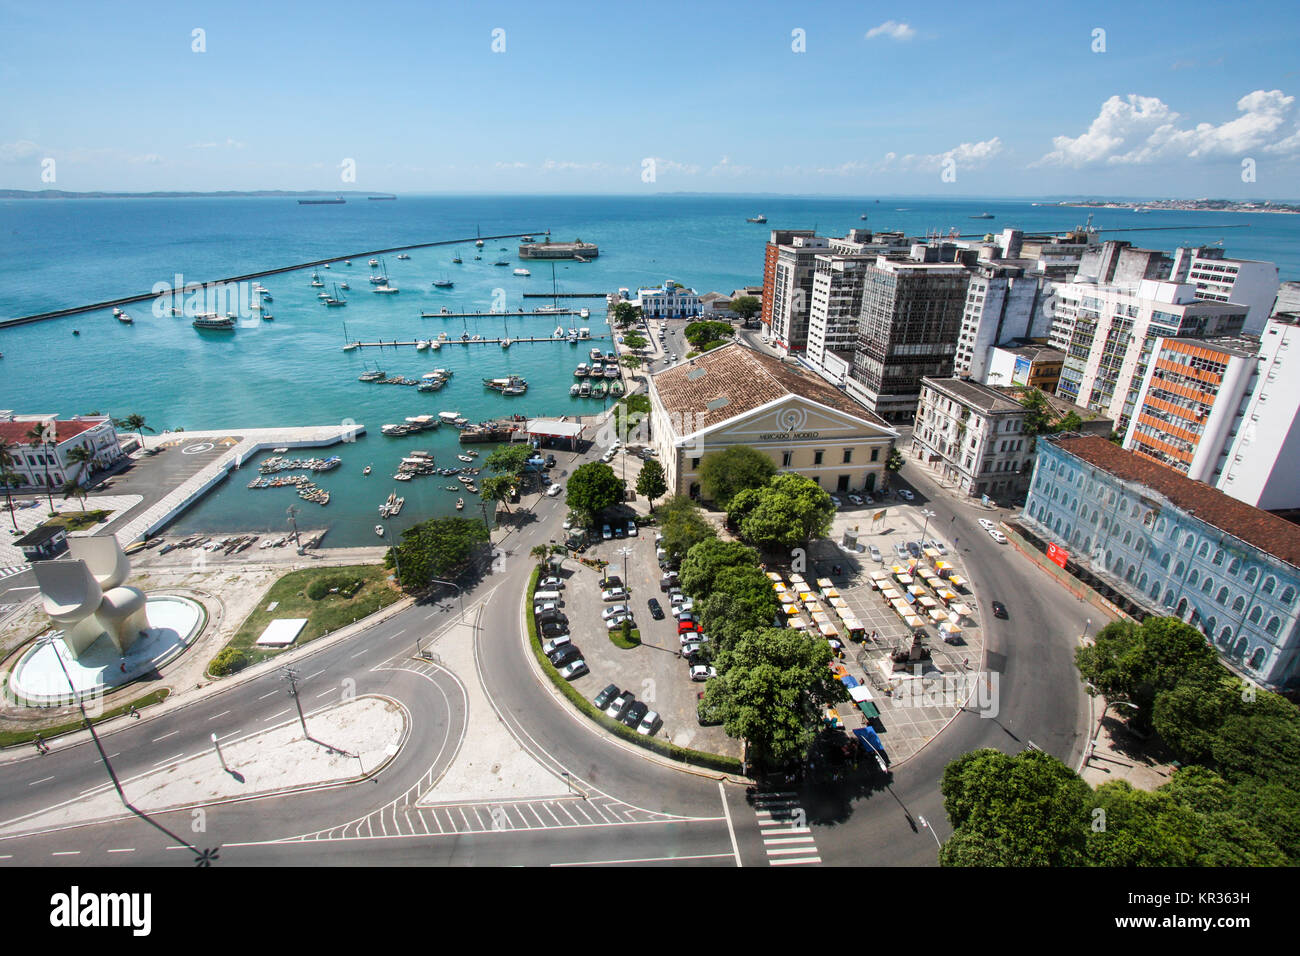 View on a old port of the Salvador de Bahia city in Brazil Stock Photo